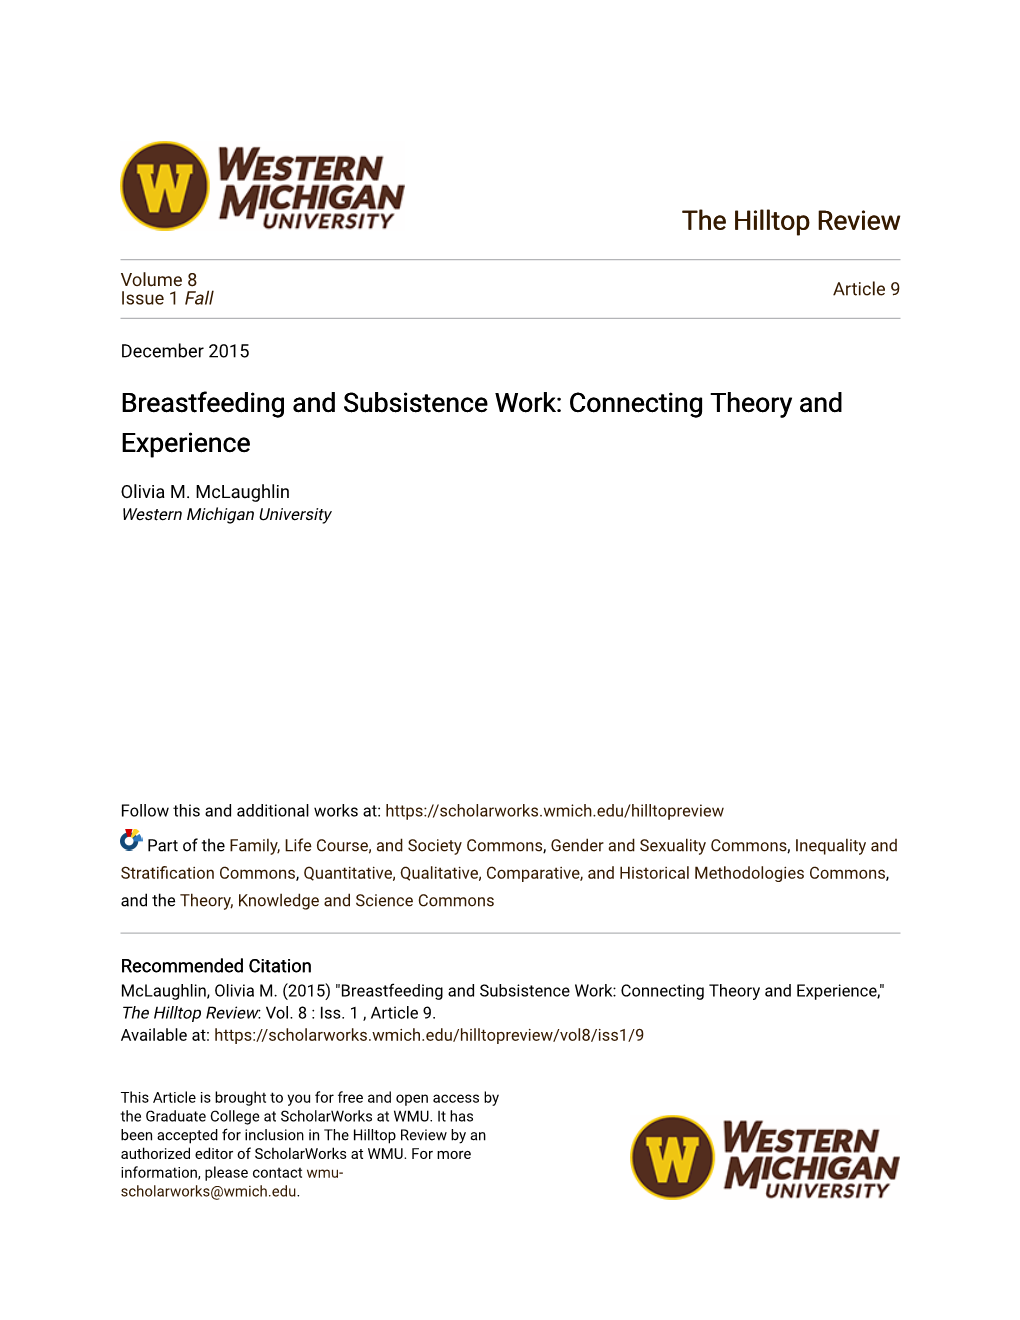 Breastfeeding and Subsistence Work: Connecting Theory and Experience